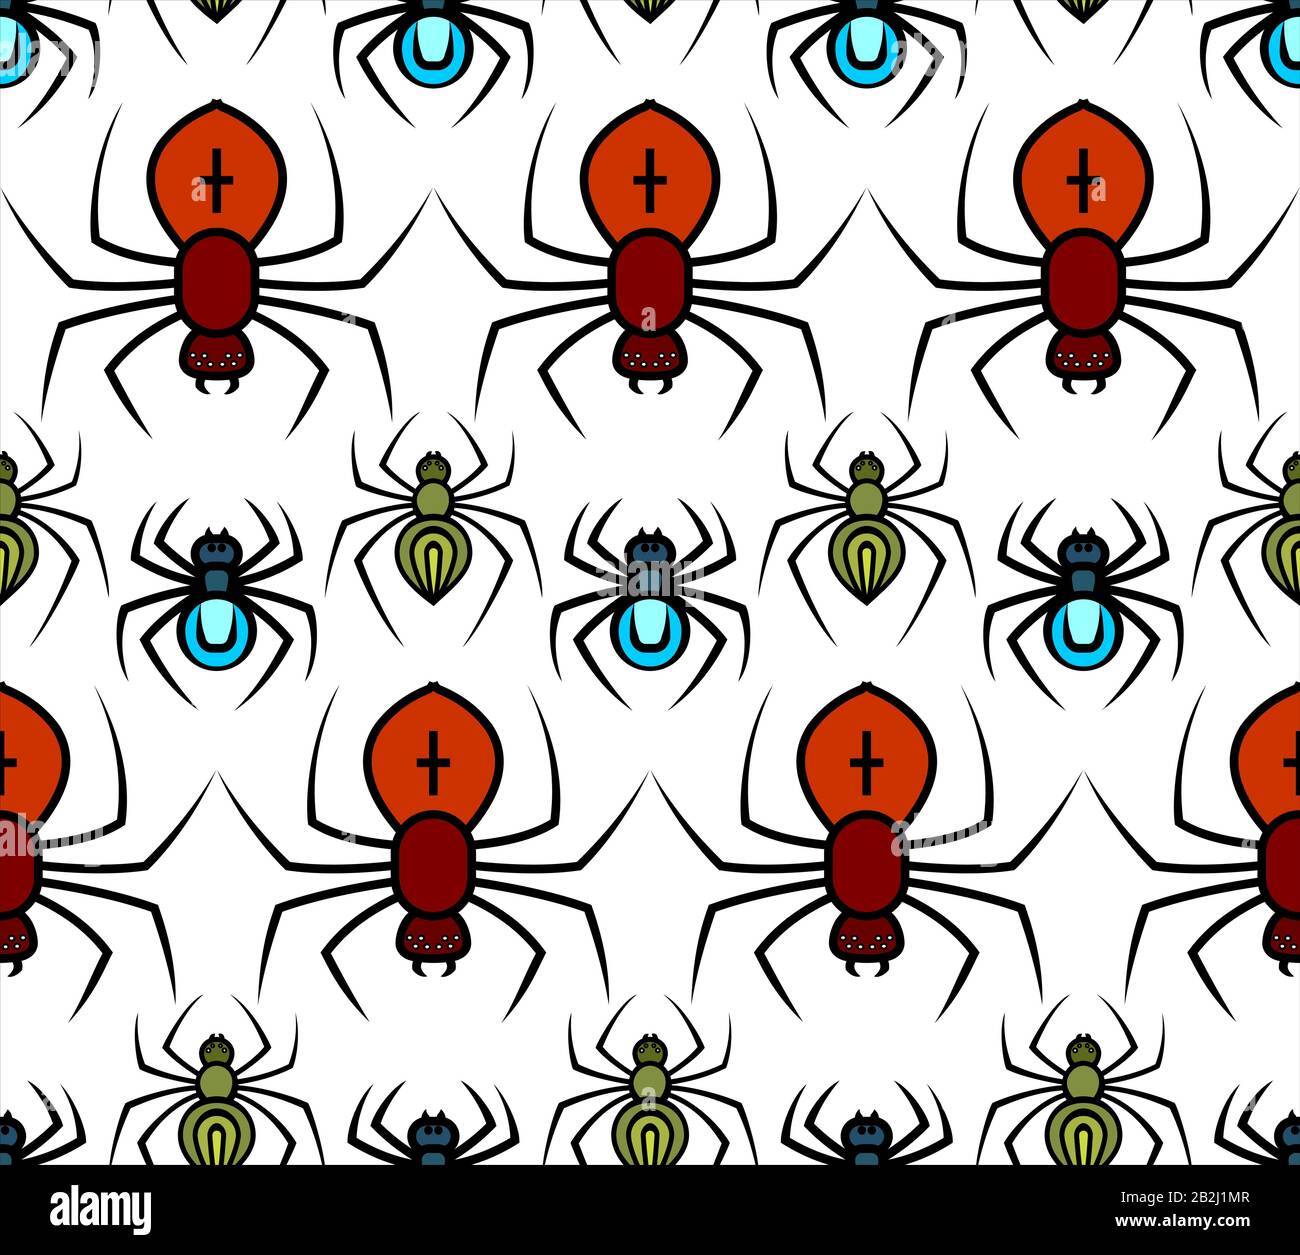 Vector Seamless Pattern Of Spiders In Different Sizes And Colors. Pattern For Halloween, Decoration, Wrapping Paper, Greeting Card, Fabric, Textile, B Stock Vector